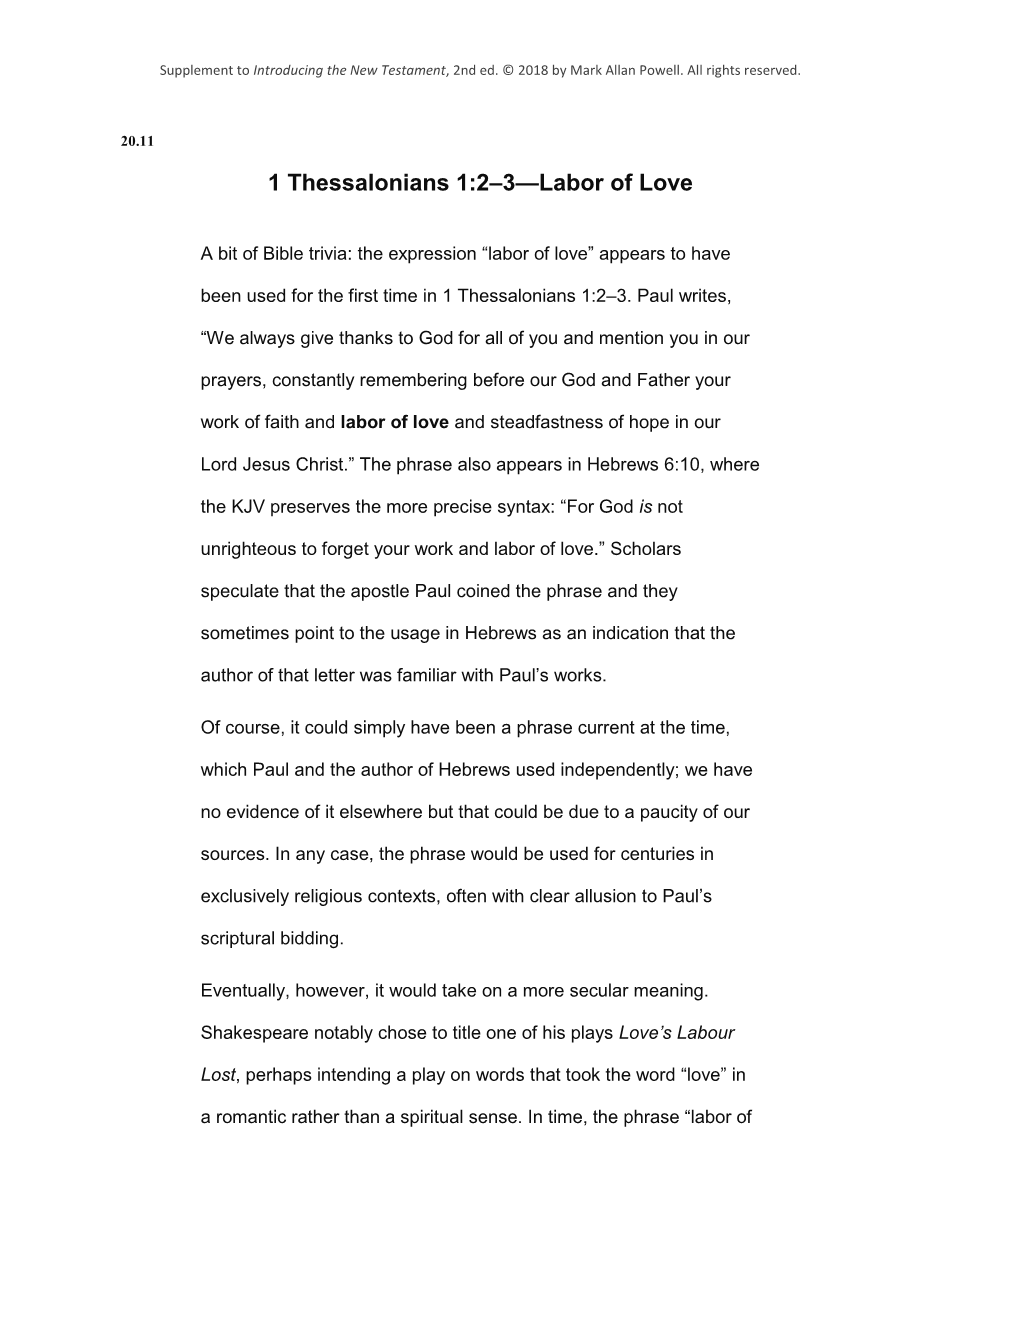 1 Thessalonians 1:2–3—Labor of Love